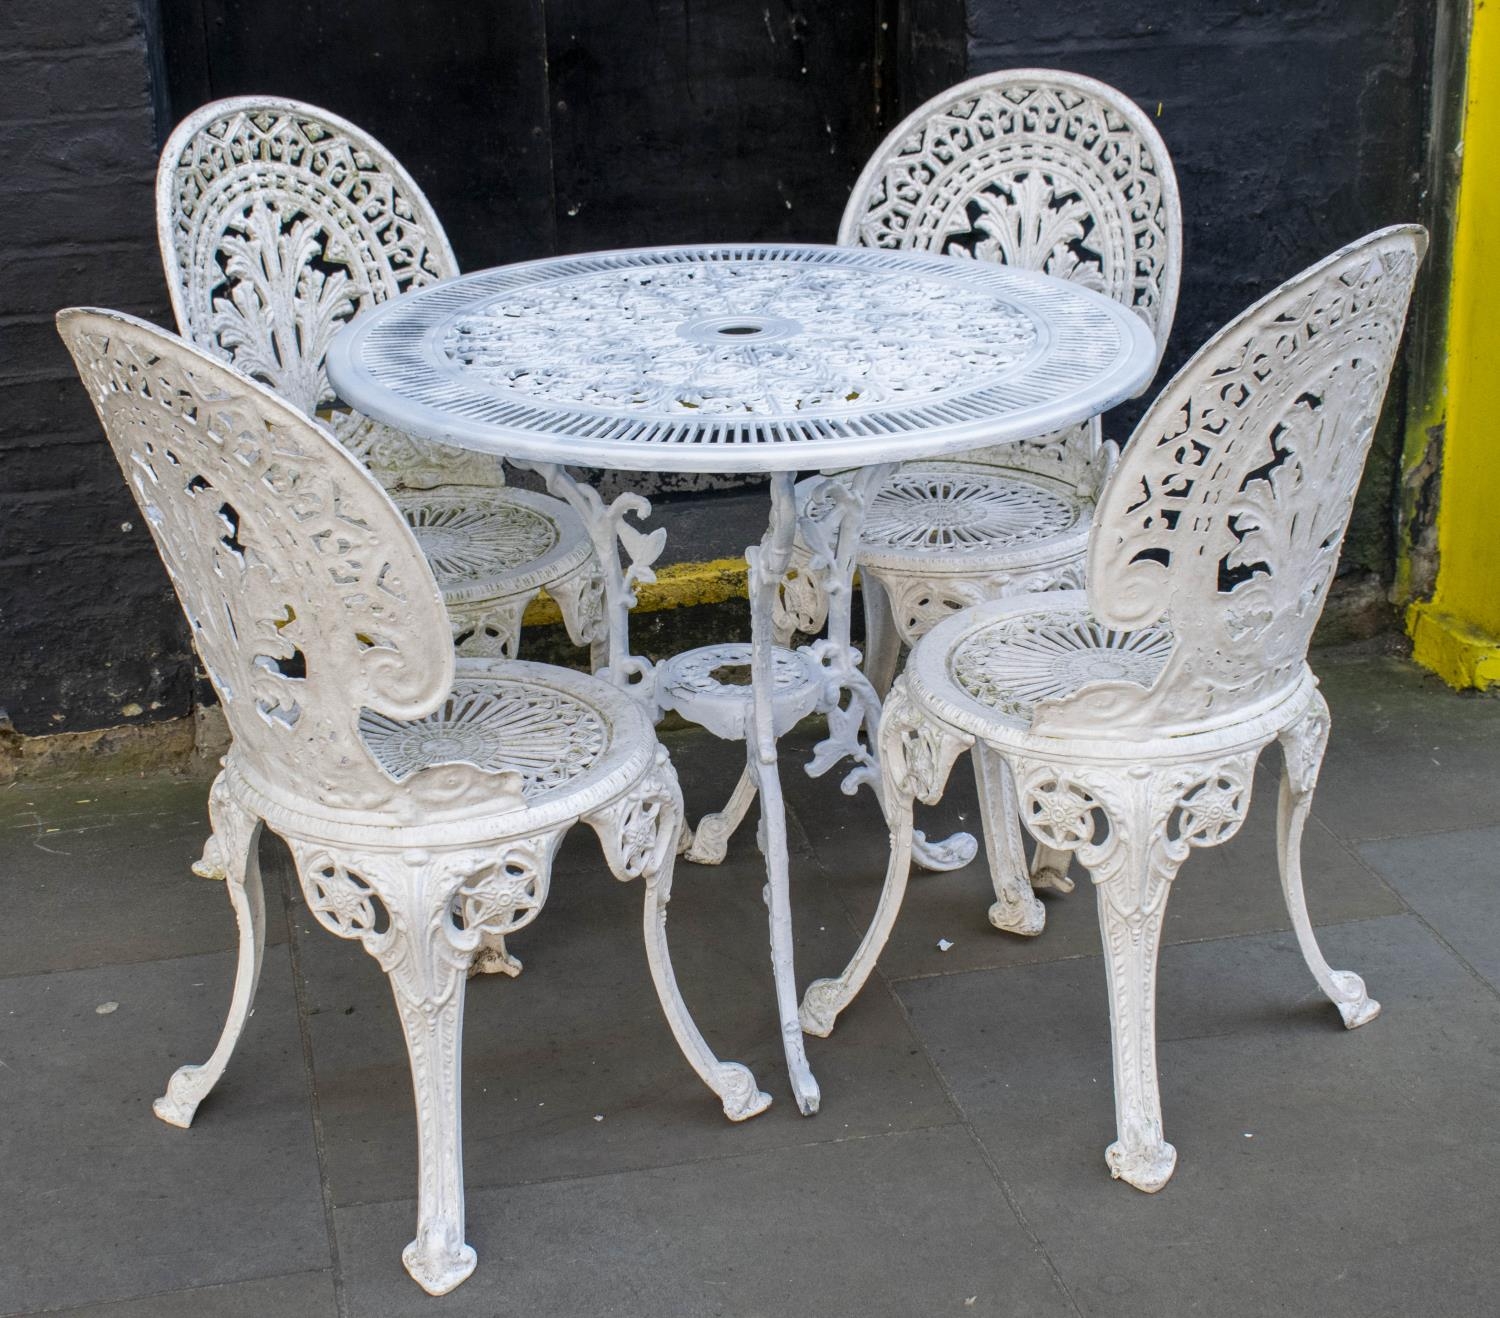 GARDEN TABLE, 69cm H x 80cm D, white painted aluminium with circular top and a set of four